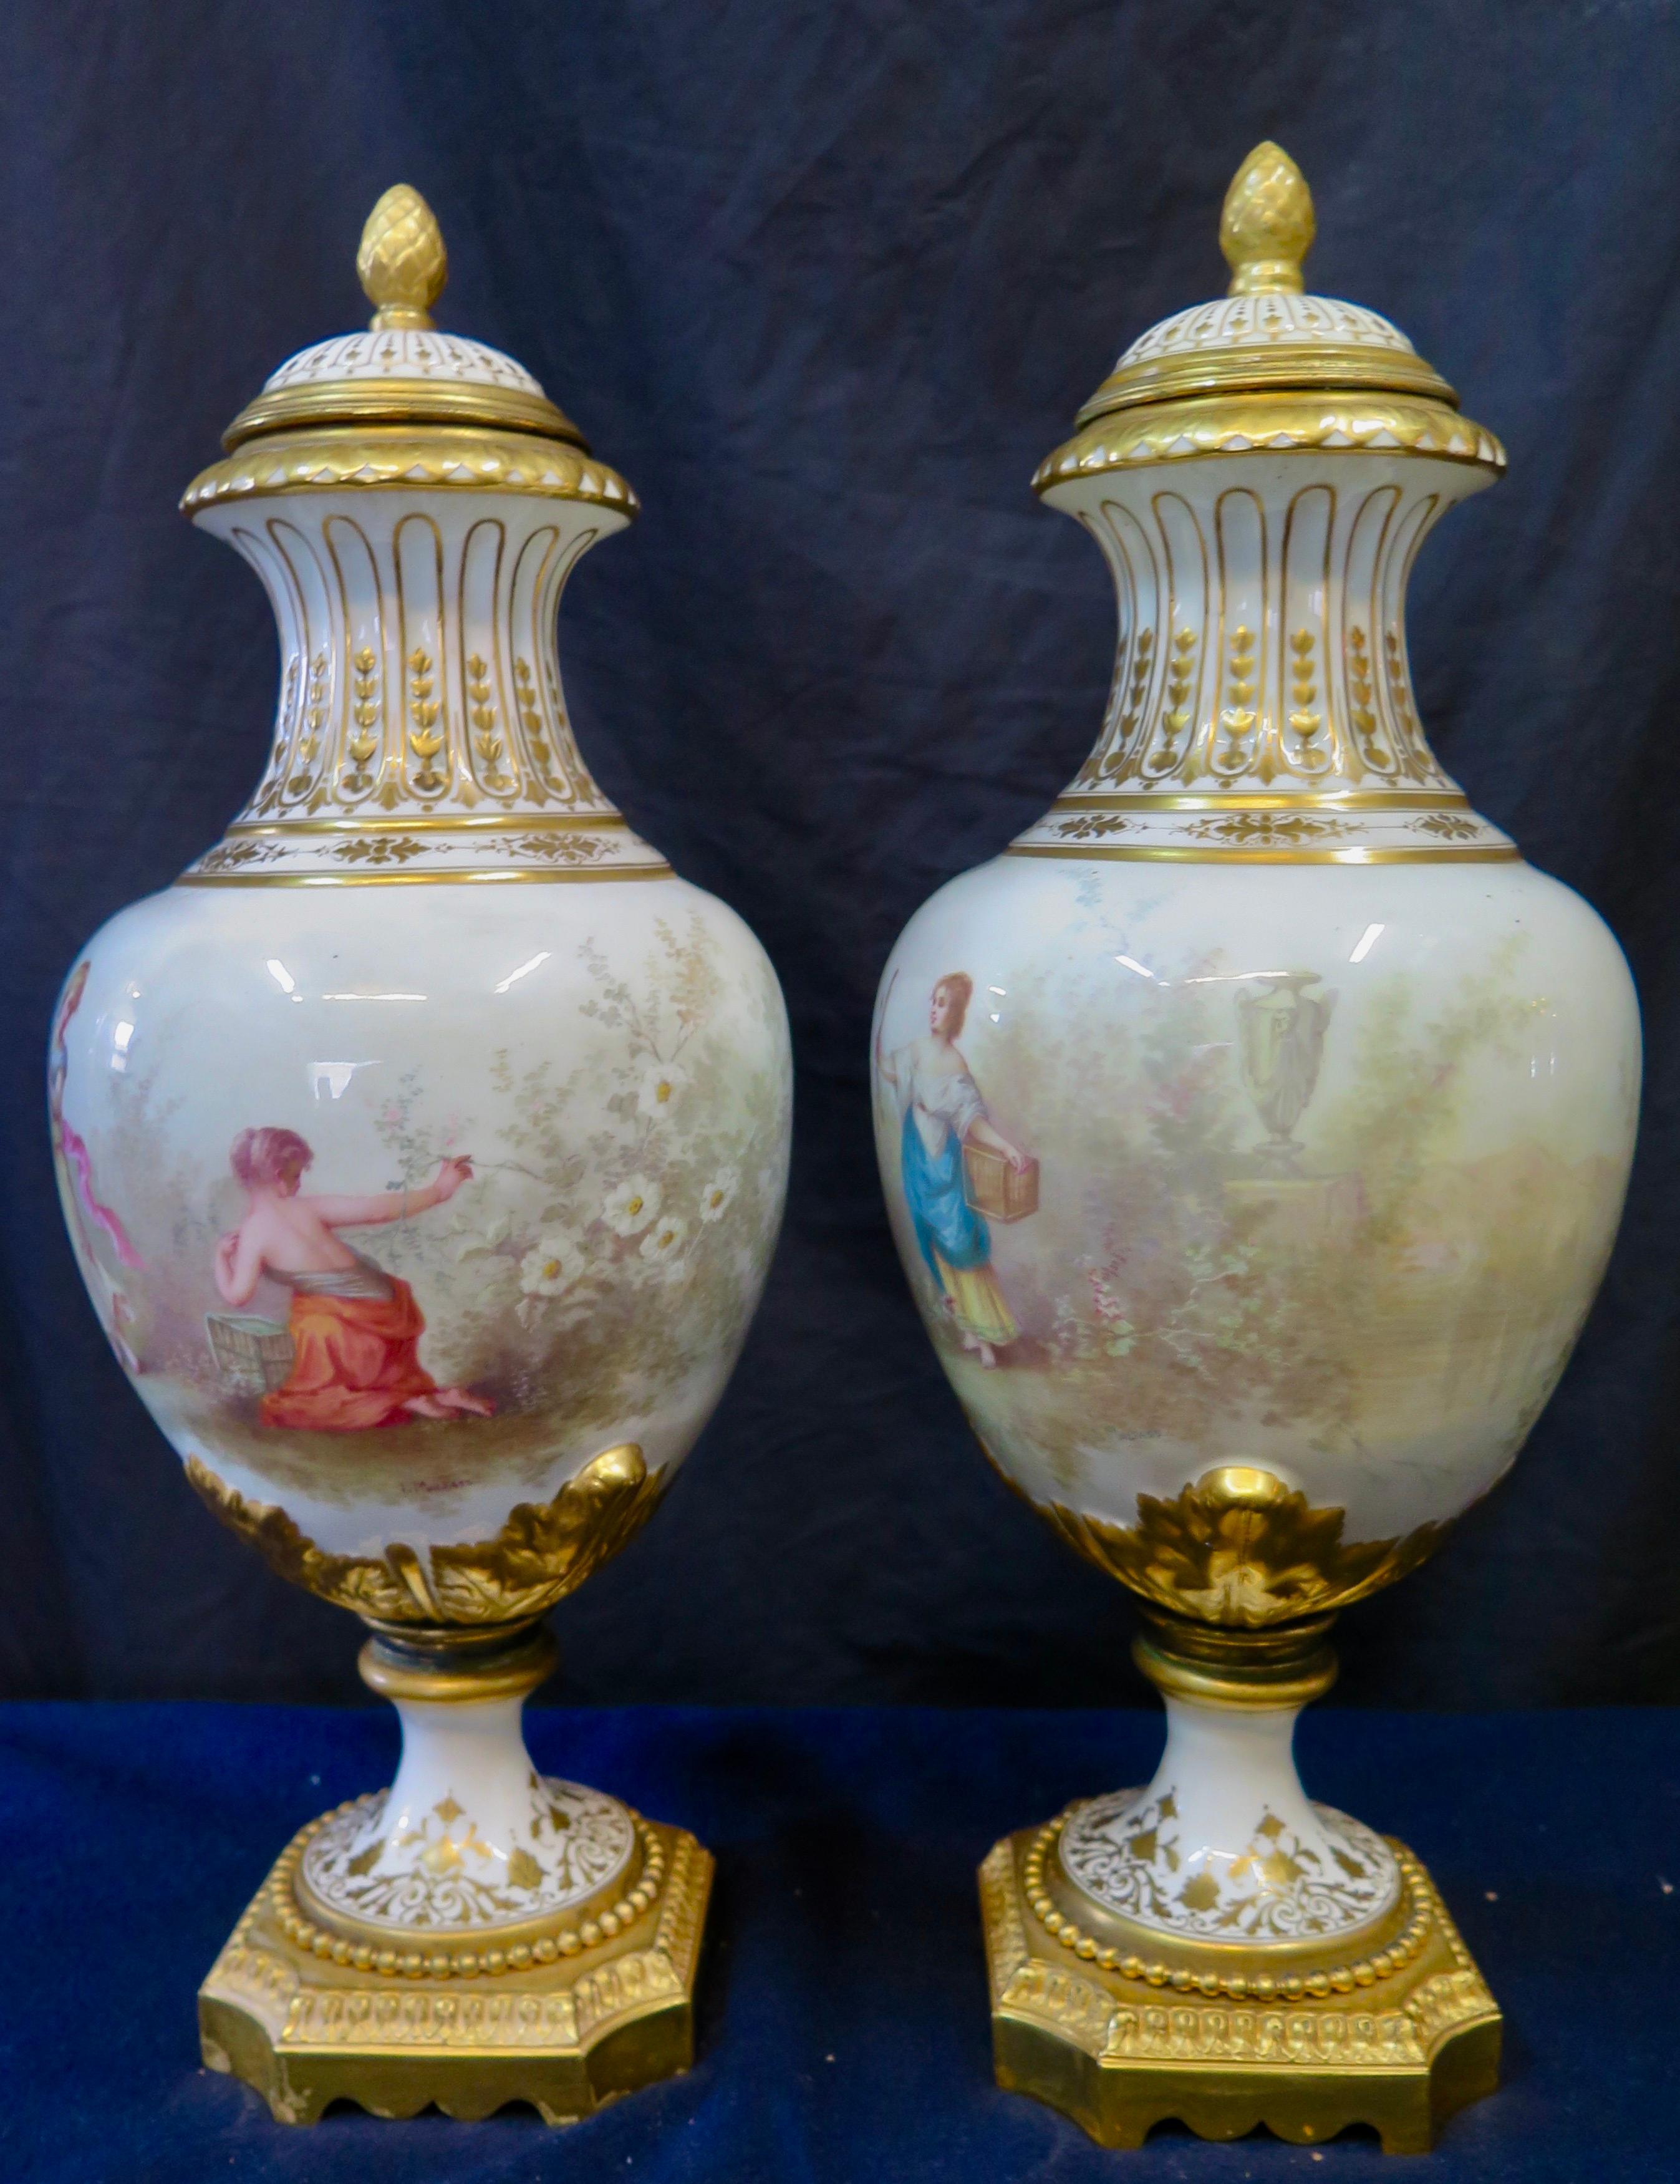 This vintage pair of stunning porcelain covered urns date from the mid 19th century & are attributed to Sevres. Each urn is beautifully decorated with charming colorful hand painted scenes of maidens & baby cherubs within a garden background. These